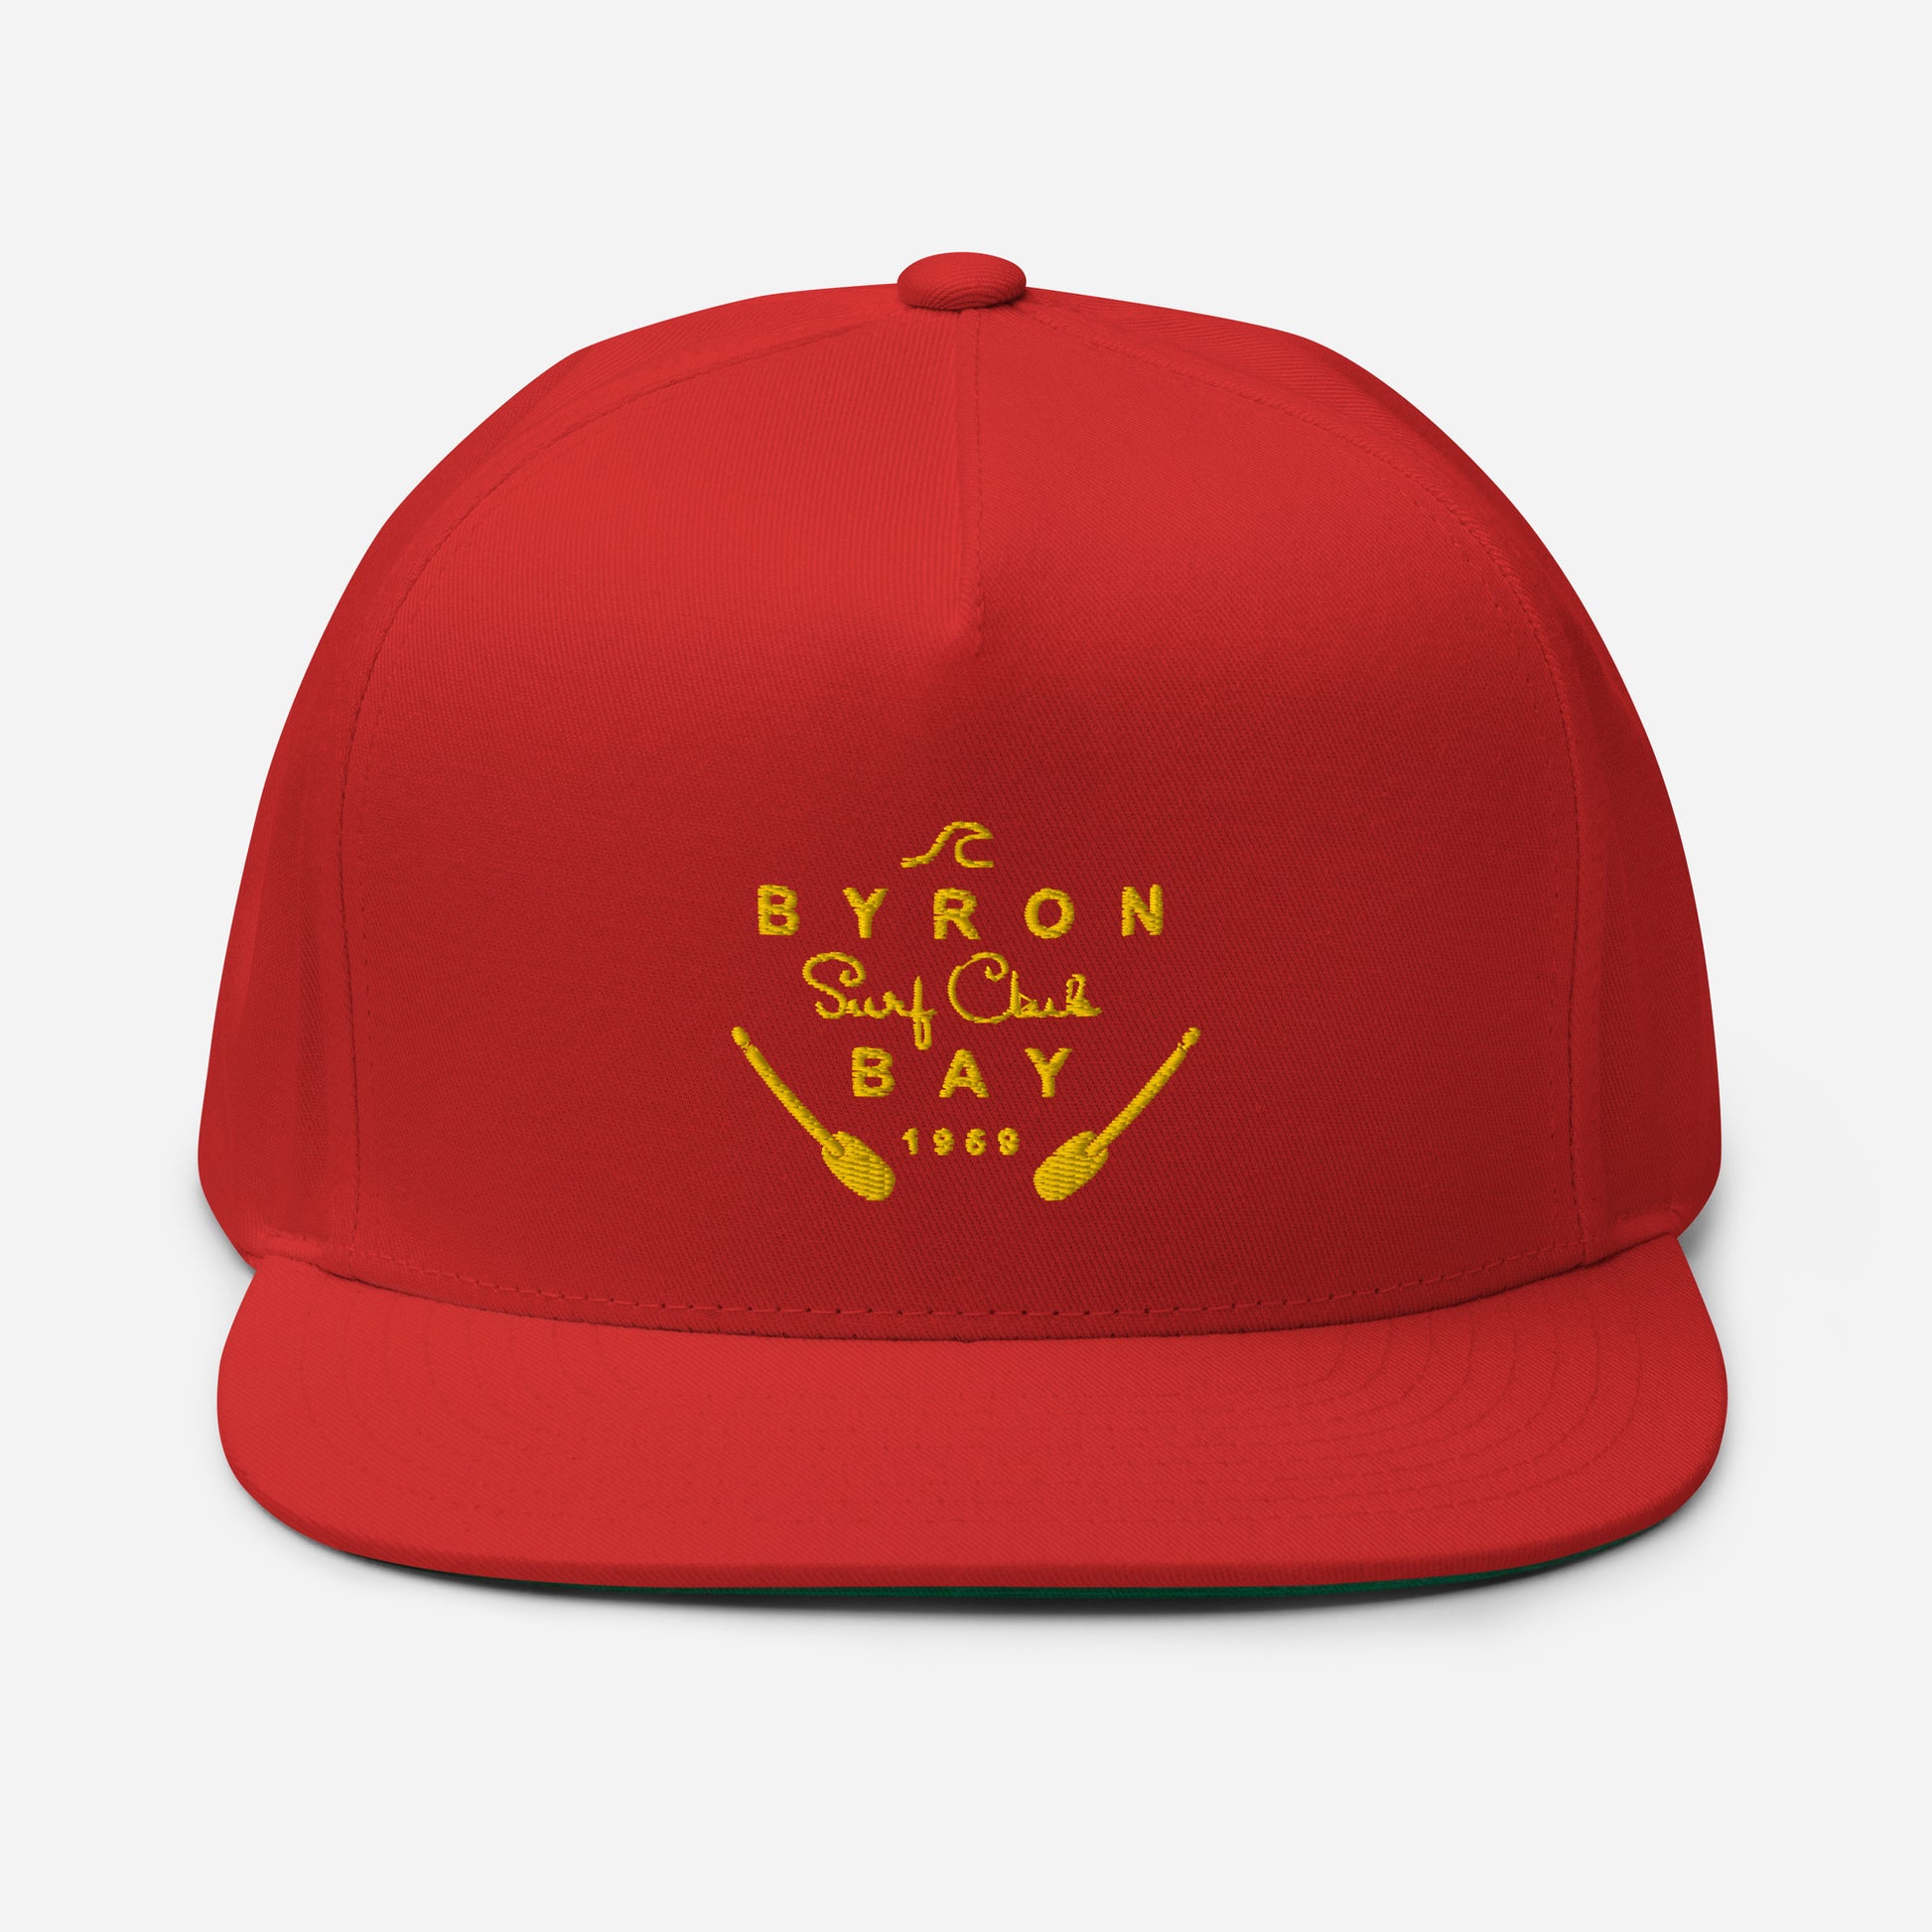  Flat Bill Cap - Red - Front view - With Yellow Byron Bay Surf Club logo on front - Genuine Byron Bay Merchandise | Produced by Go Sea Kayak Byron Bay 